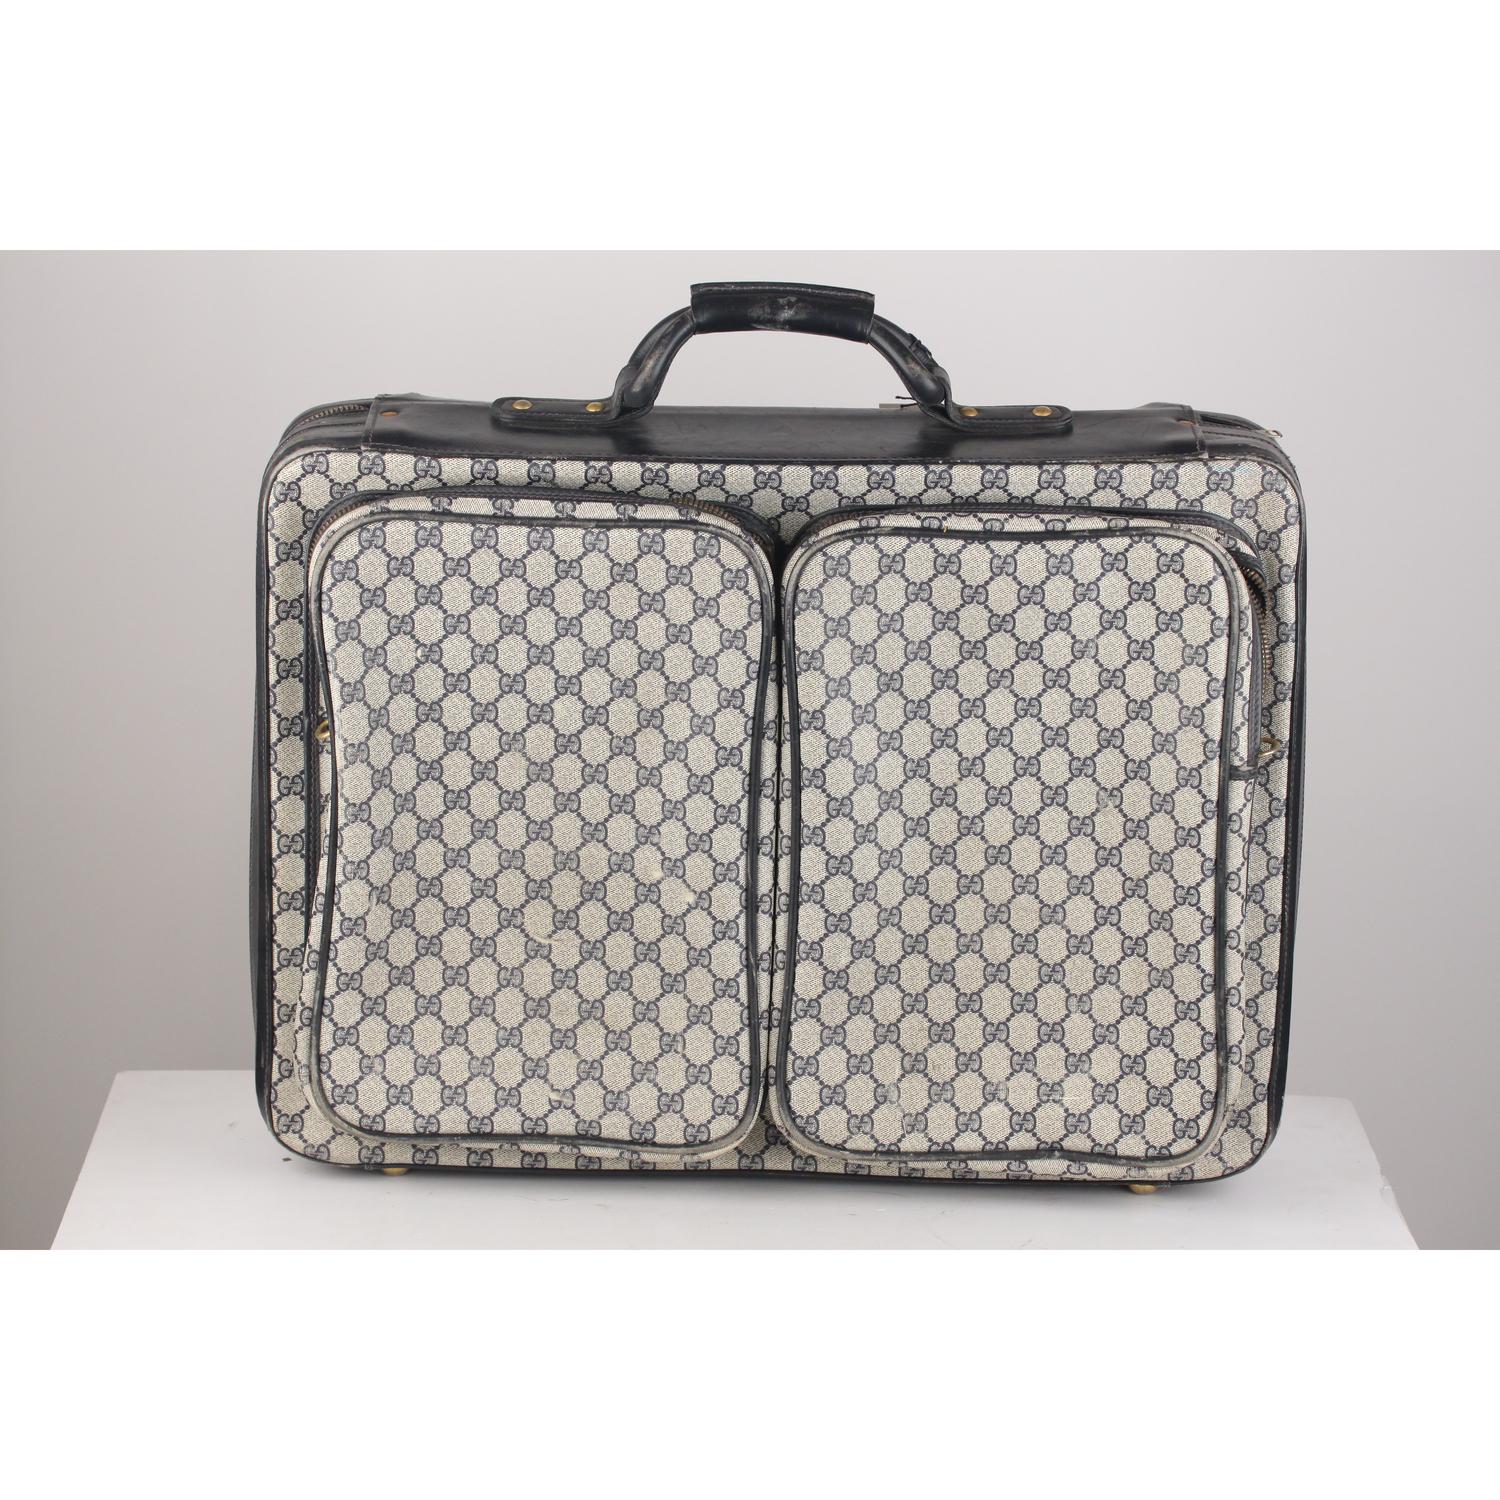 Vintage Gucci suitcase crafted of GG - GUCCI monogram canvas with blue leather trim. It features double wrap-around zip closure. Big front zip compartment and 2 rear zip pocket. Diamond fabric lining inside with 2 double leather straps to hold